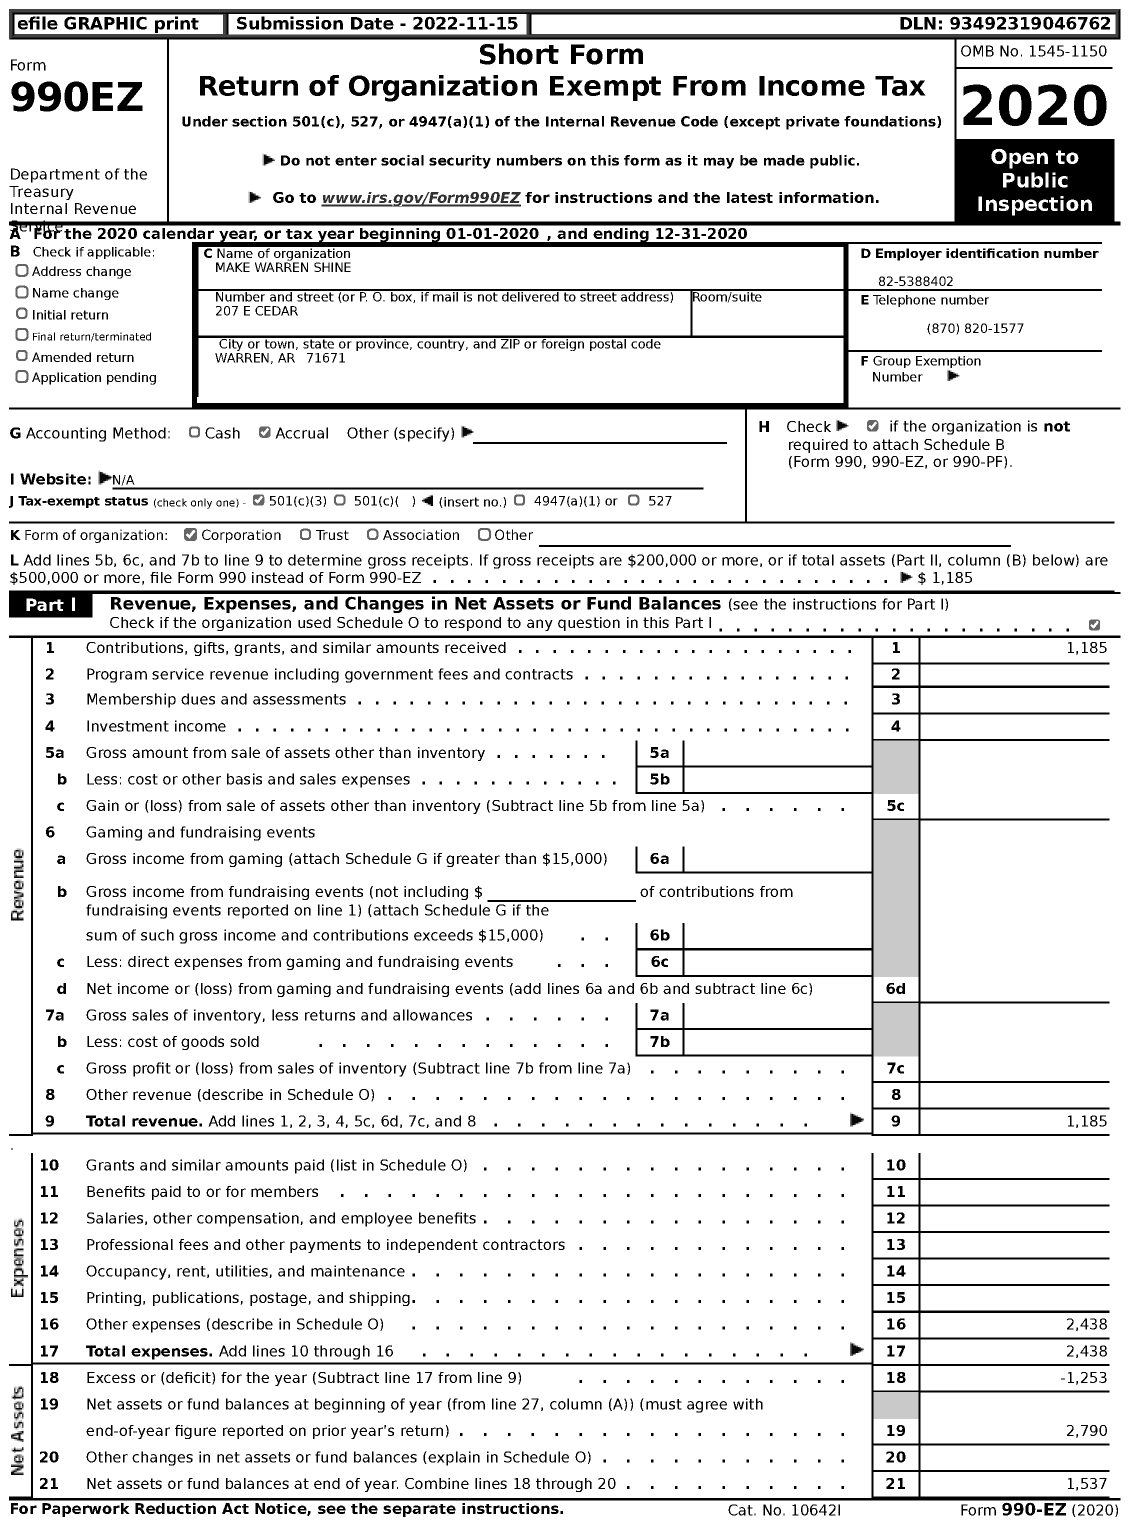 Image of first page of 2020 Form 990EZ for Make Warren Shine